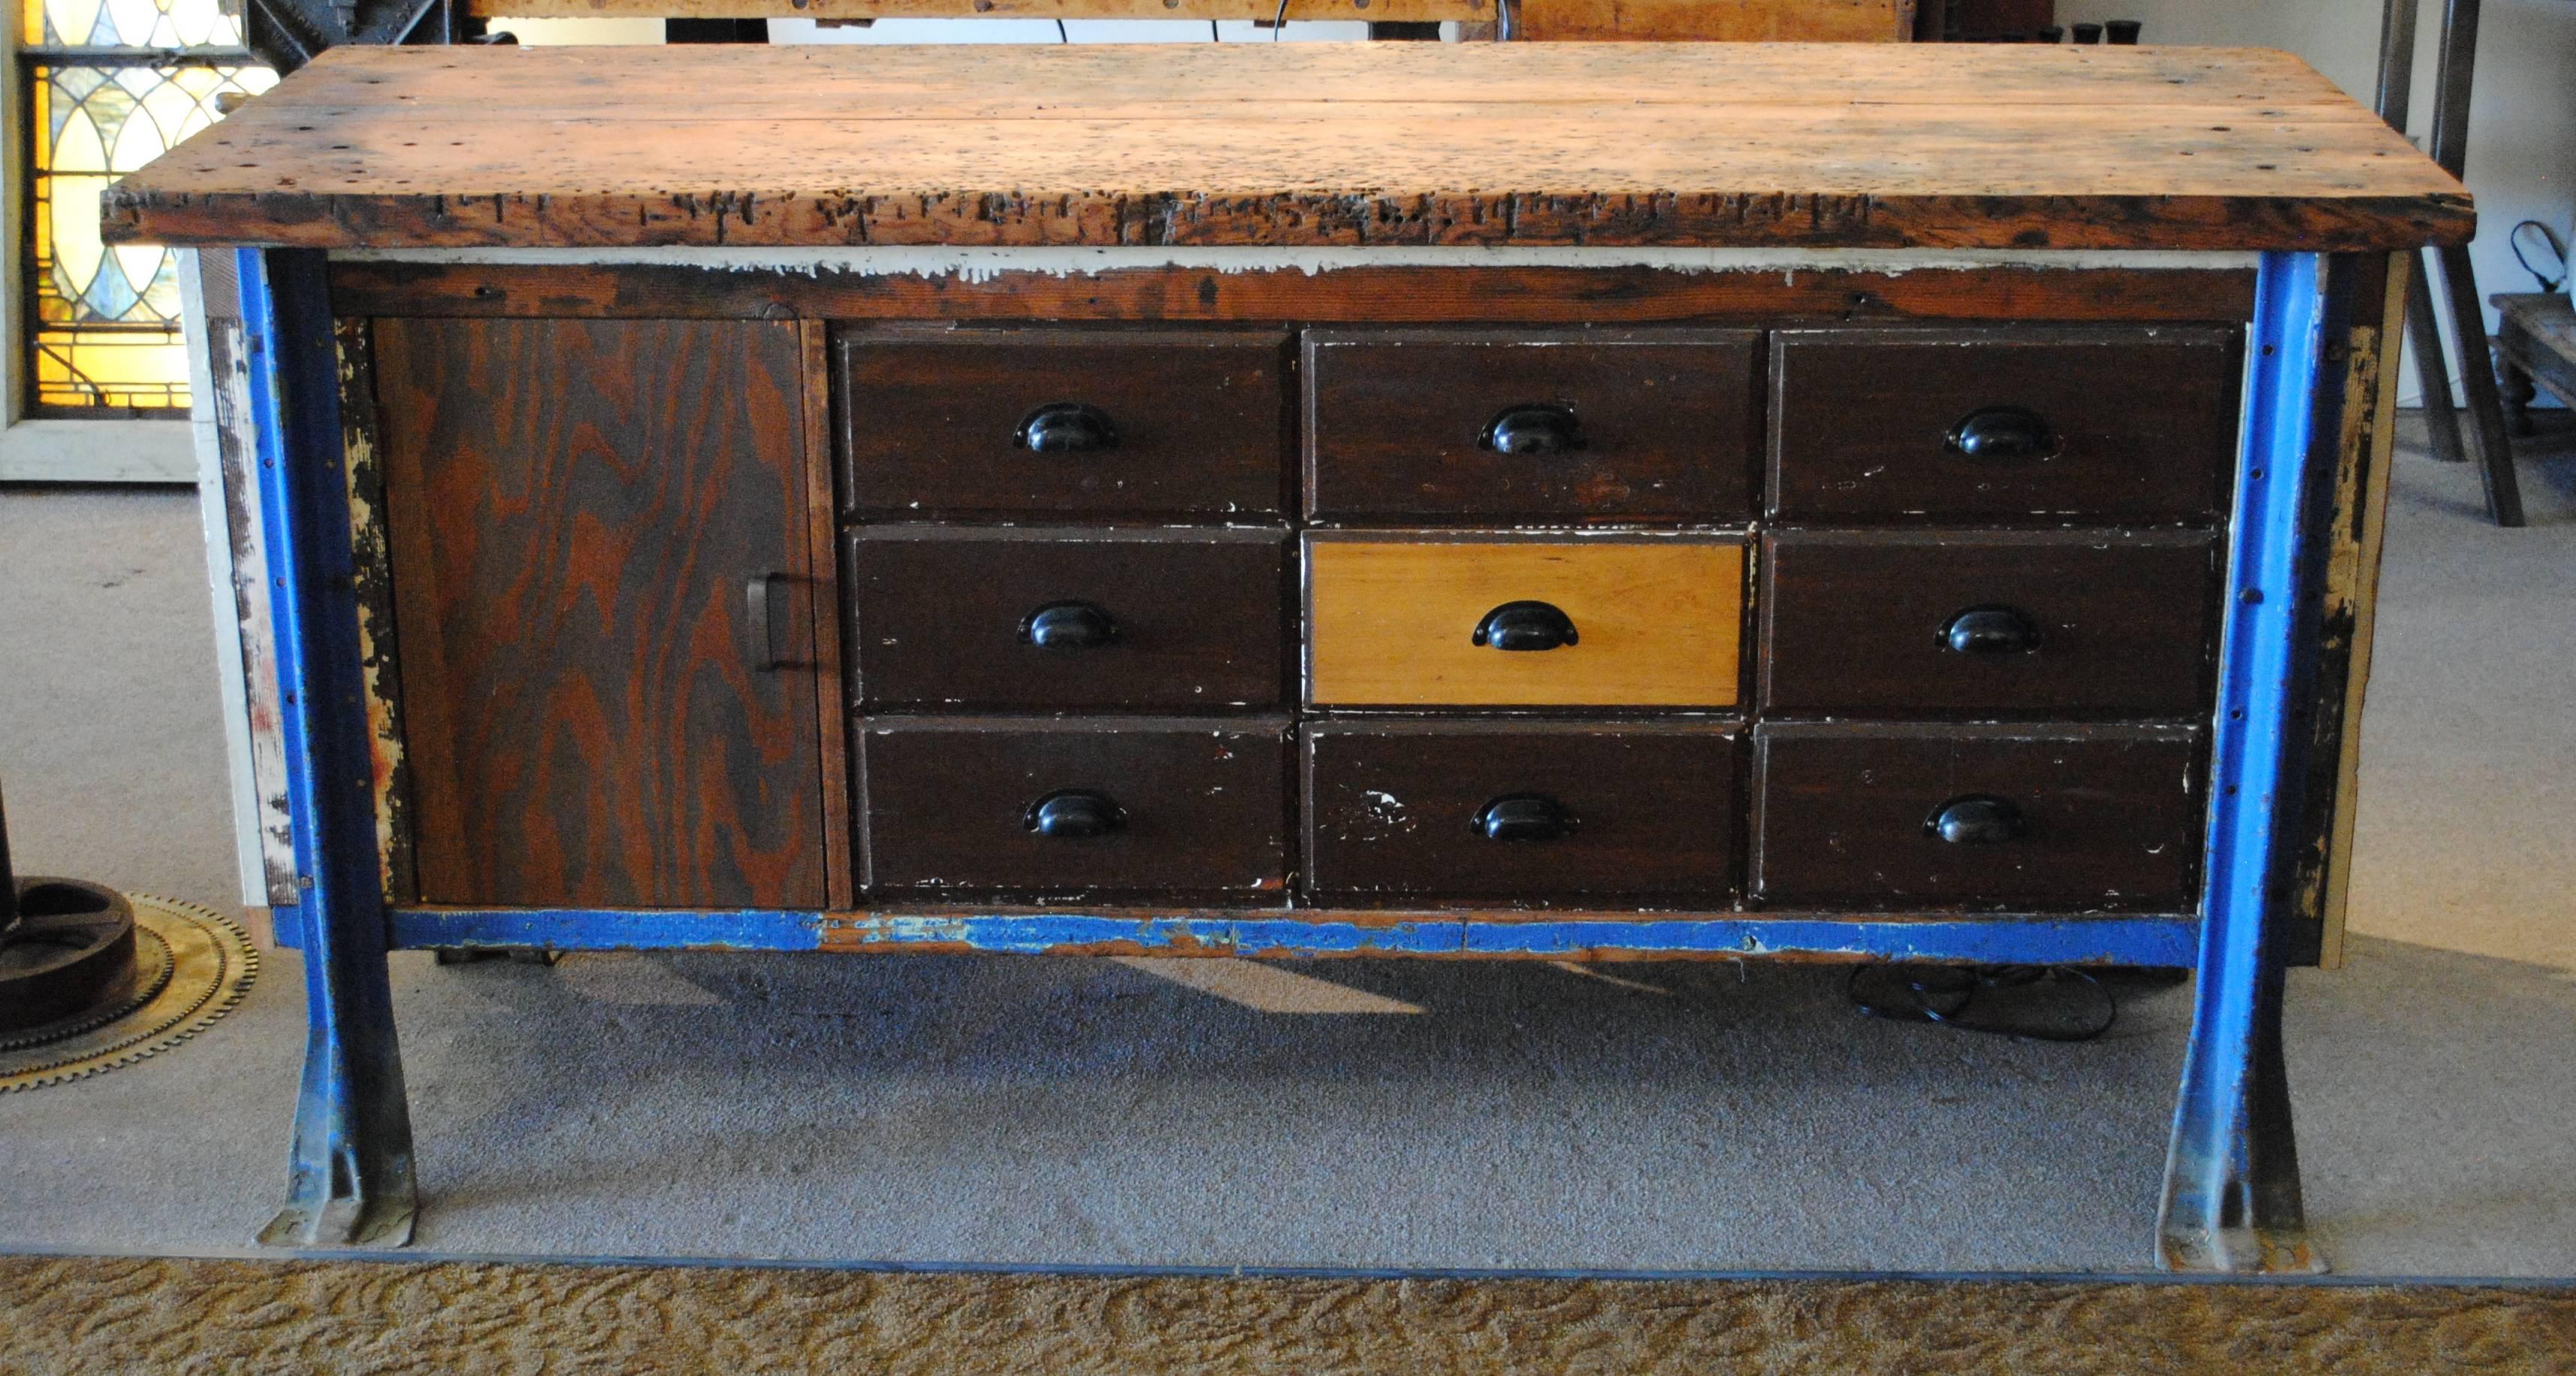 This Vintage workbench has the perfect amount of wear on the dark wood and blue steel legs. Versatility is key! This workbench is comprised of 9 drawers and one-door. This piece could be an entry table, kitchen island, craft storage.